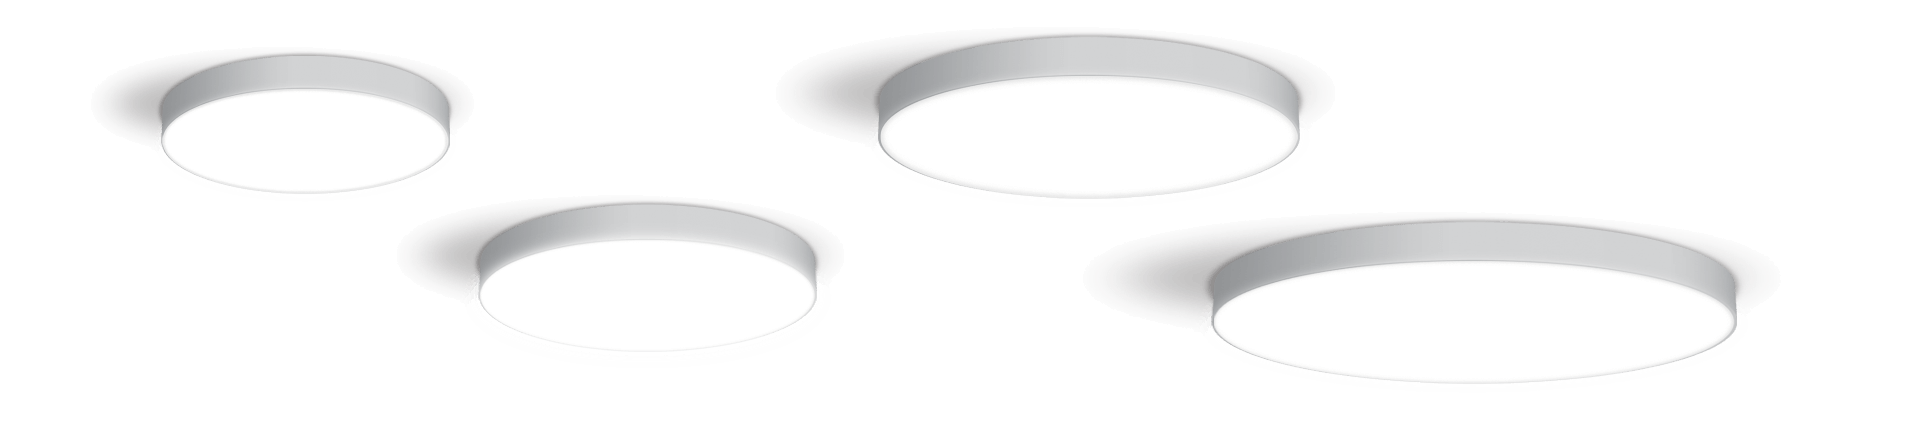 4 white round surface mount fixtures on a ceiling